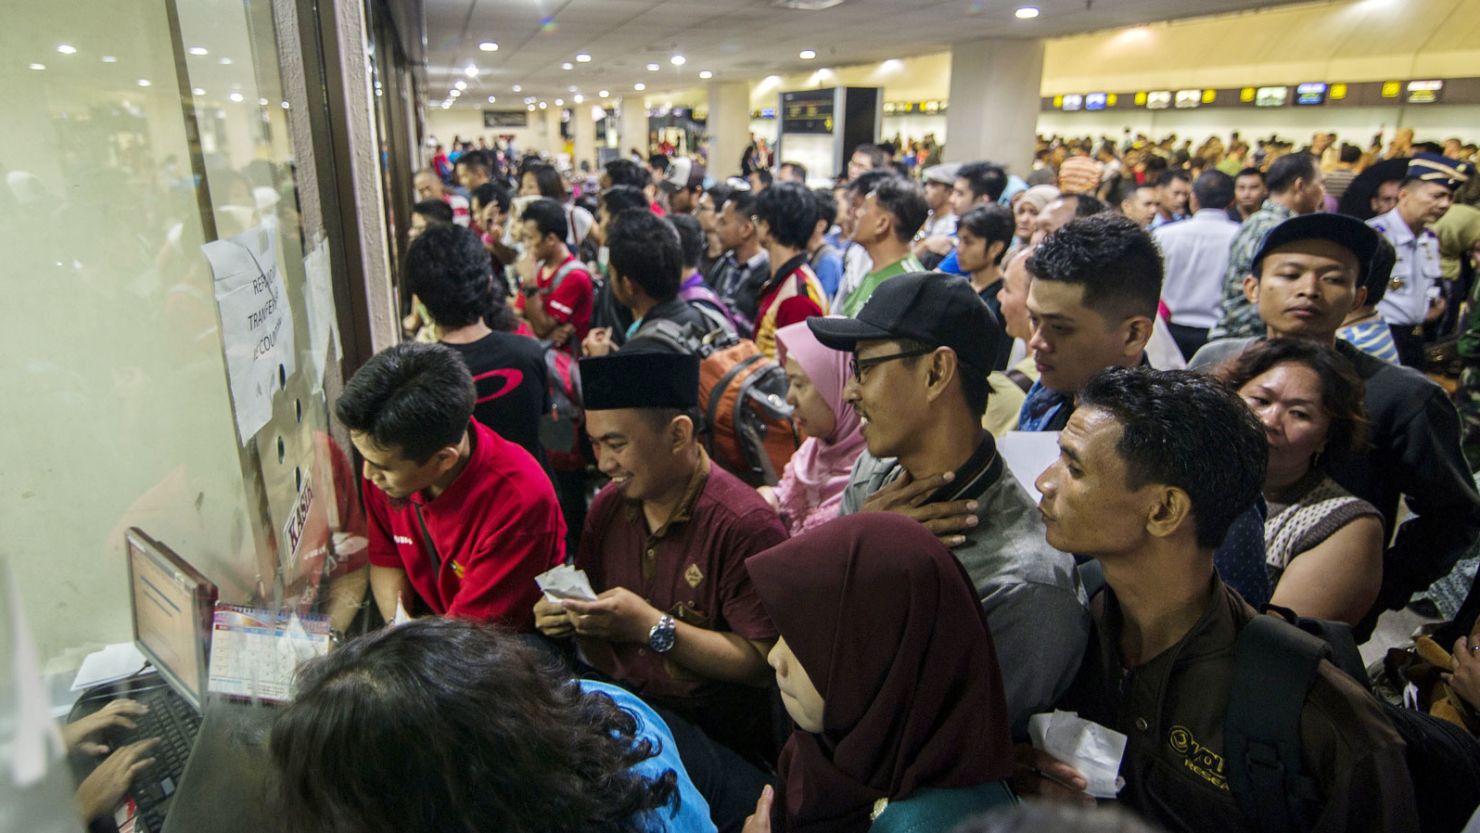 Thousands of passengers were stranded at the airports in Indonesia due to volcanic activities ahead of the Eid holiday.